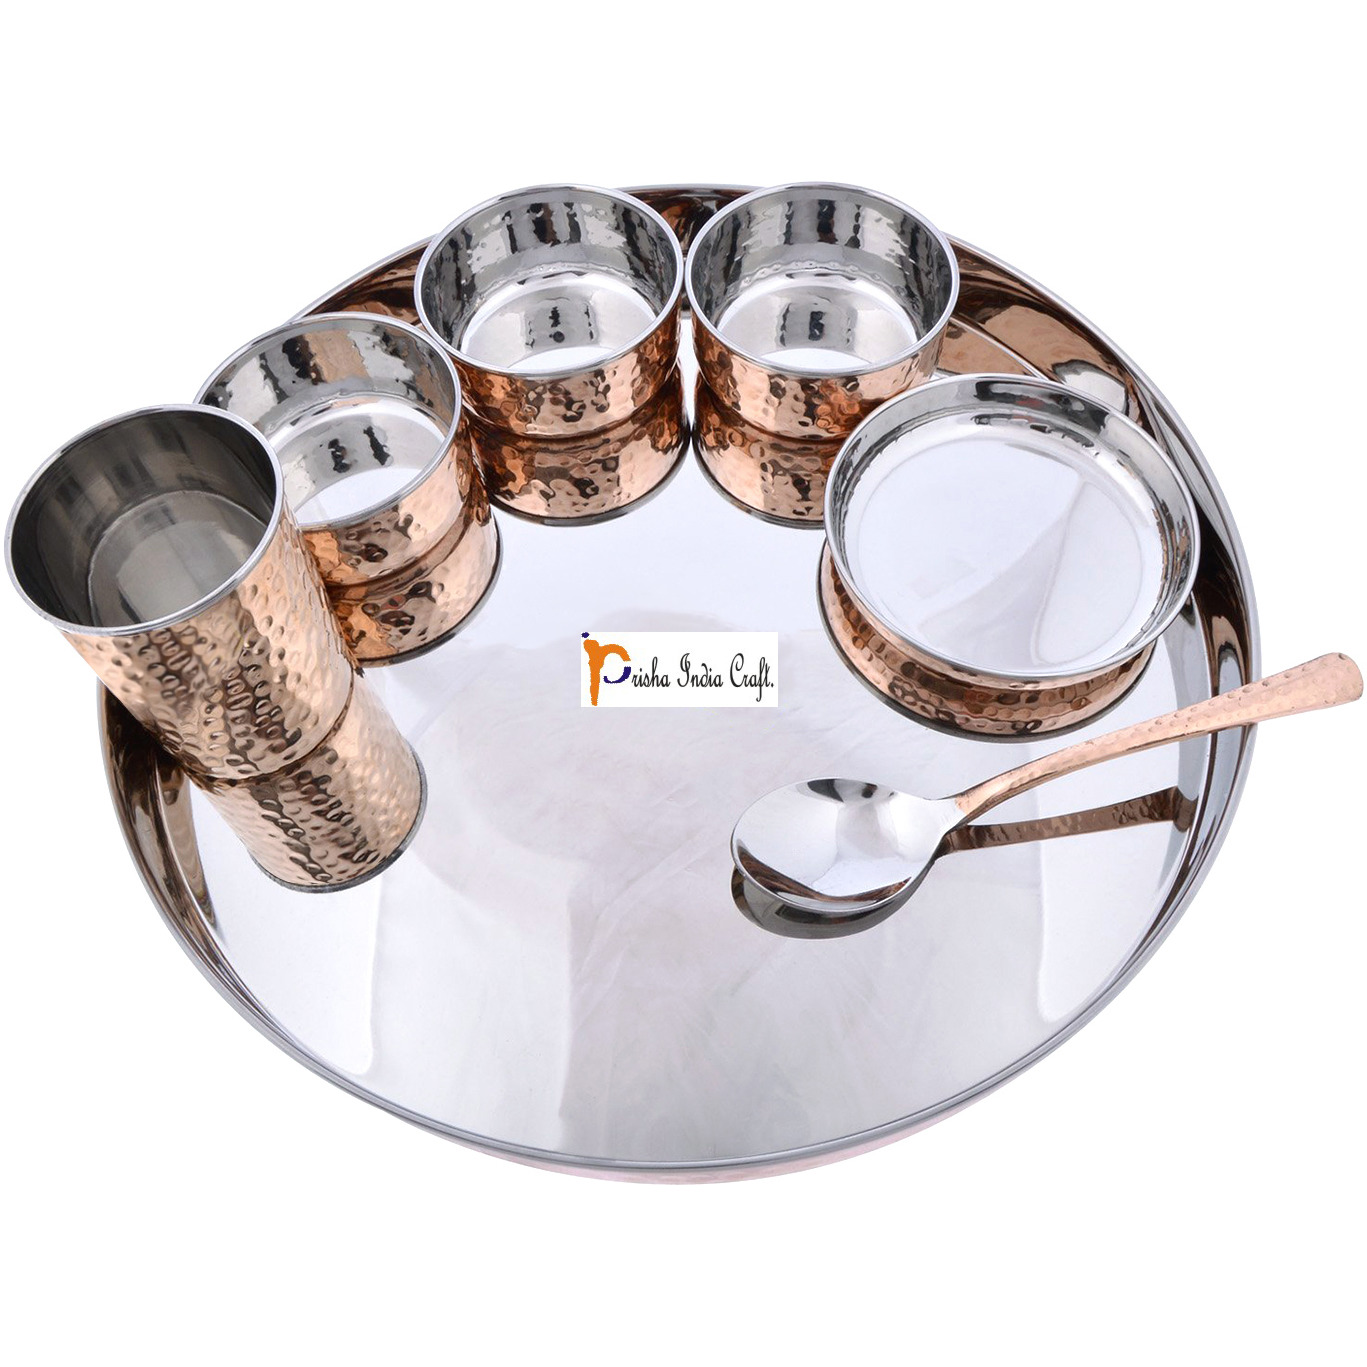 Prisha India Craft B. Set of 3 Dinnerware Traditional Stainless Steel Copper Dinner Set of Thali Plate, Bowls, Glass and Spoon, Dia 13  With 1 Pure Copper Embossed Pitcher Jug - Christmas Gift